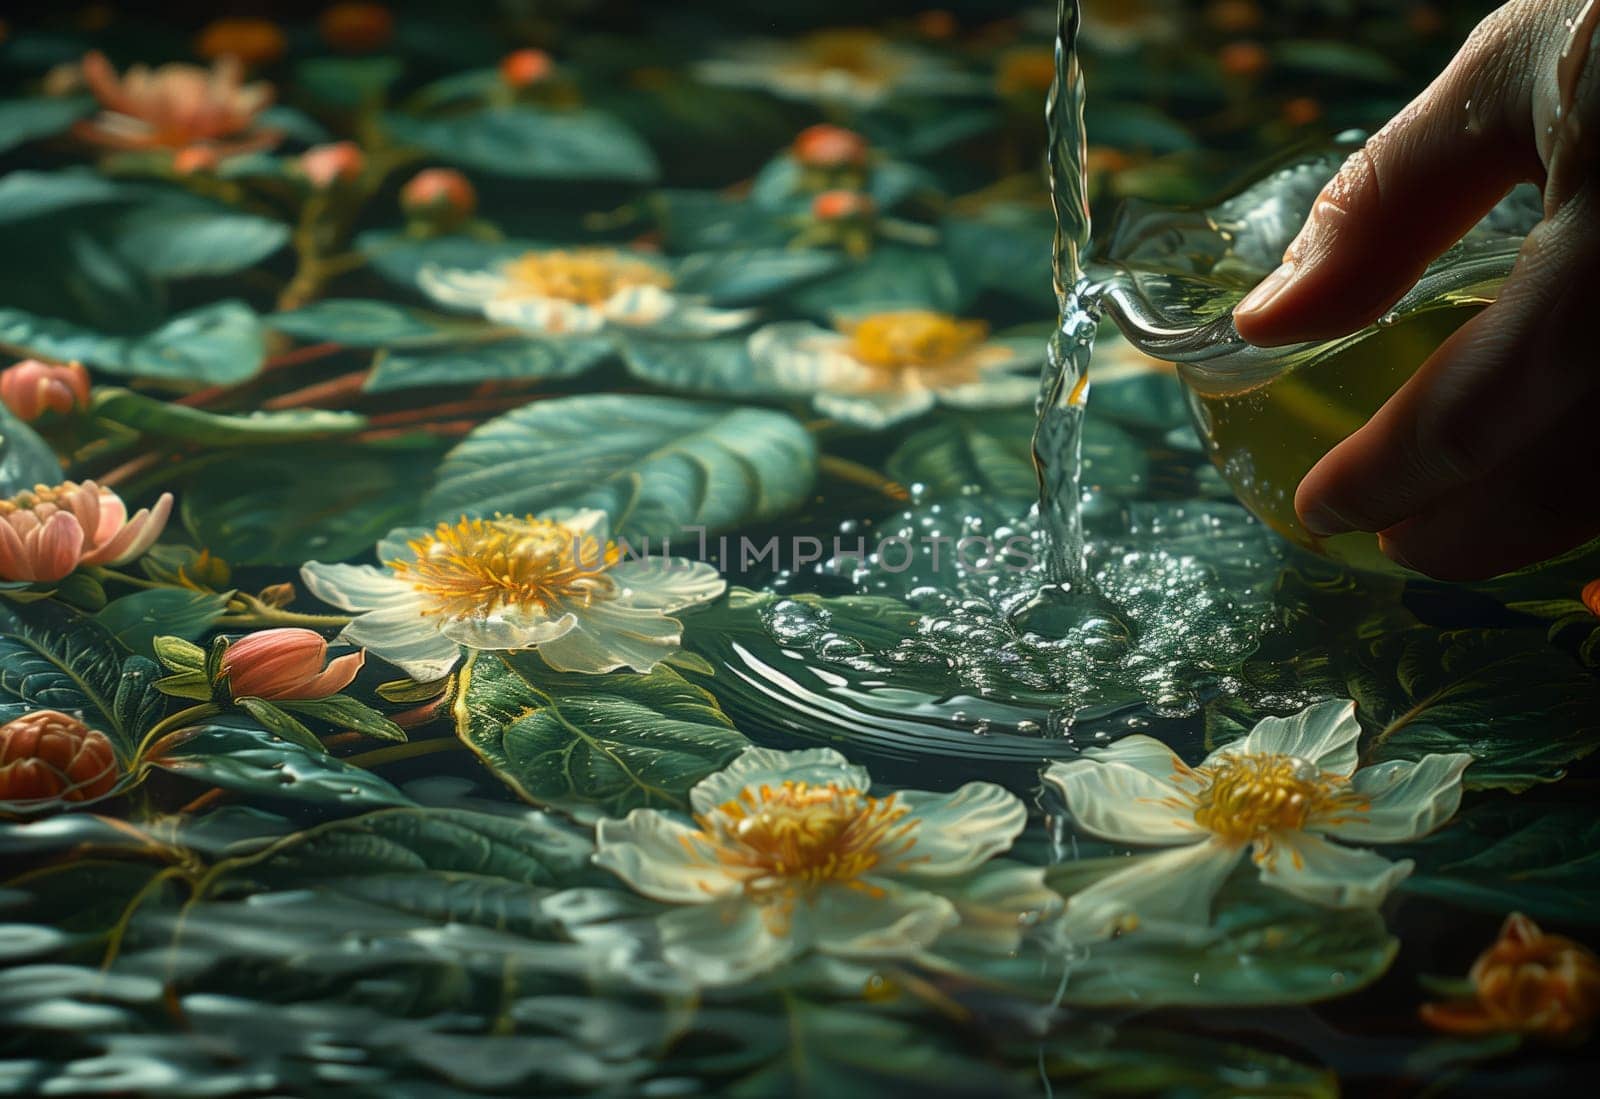 a person is pouring water into a pond with flowers and leaves by richwolf